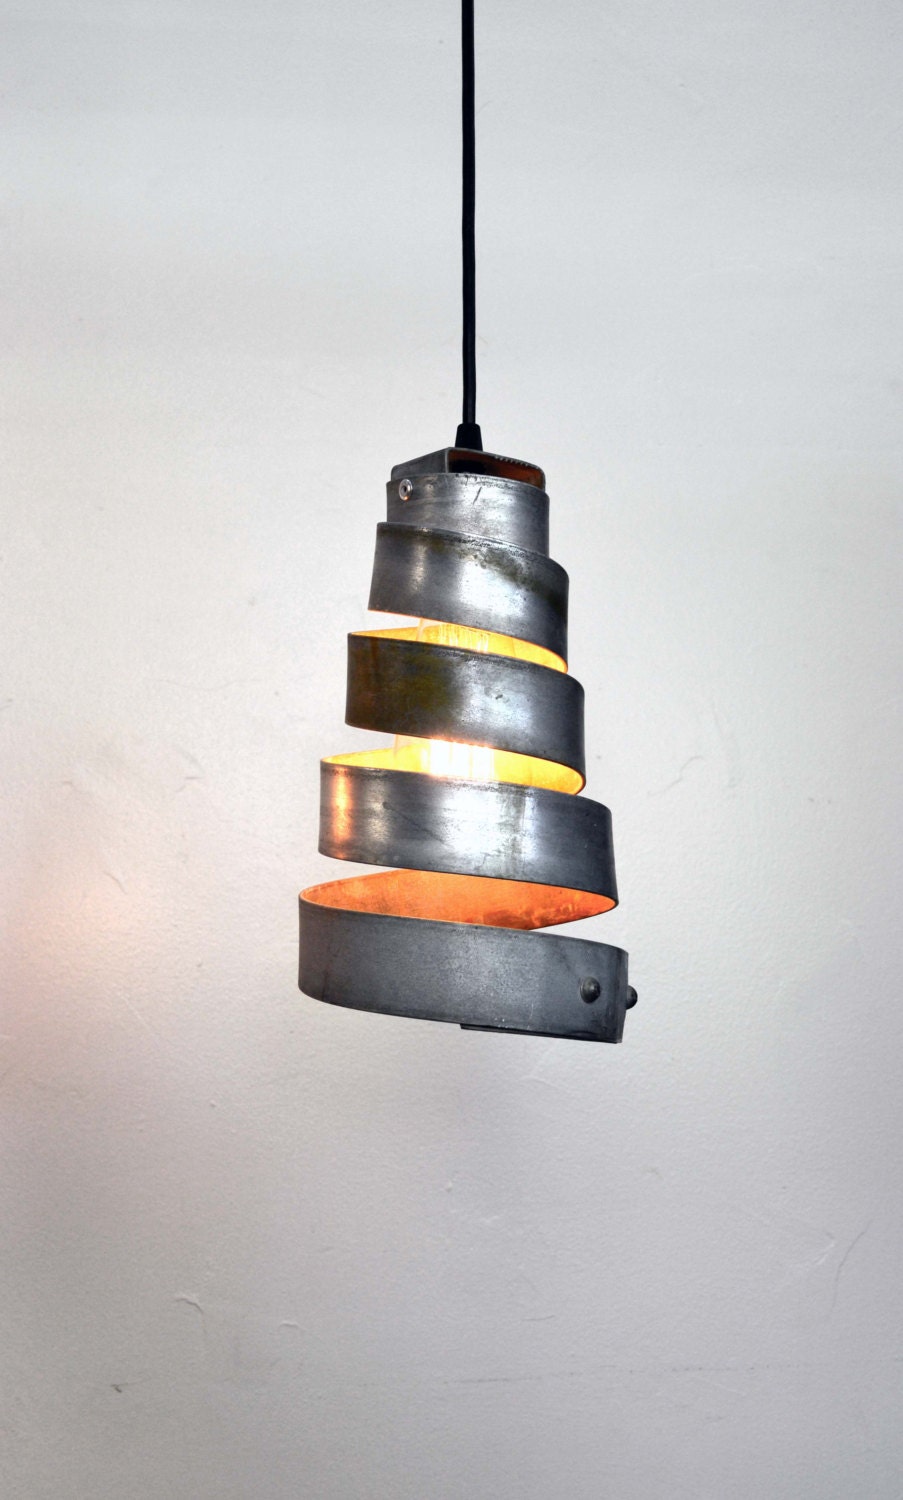 Wine Barrel Ring Pendant Light - Manacle - Made from retired California wine barrel rings 100% Recycled!